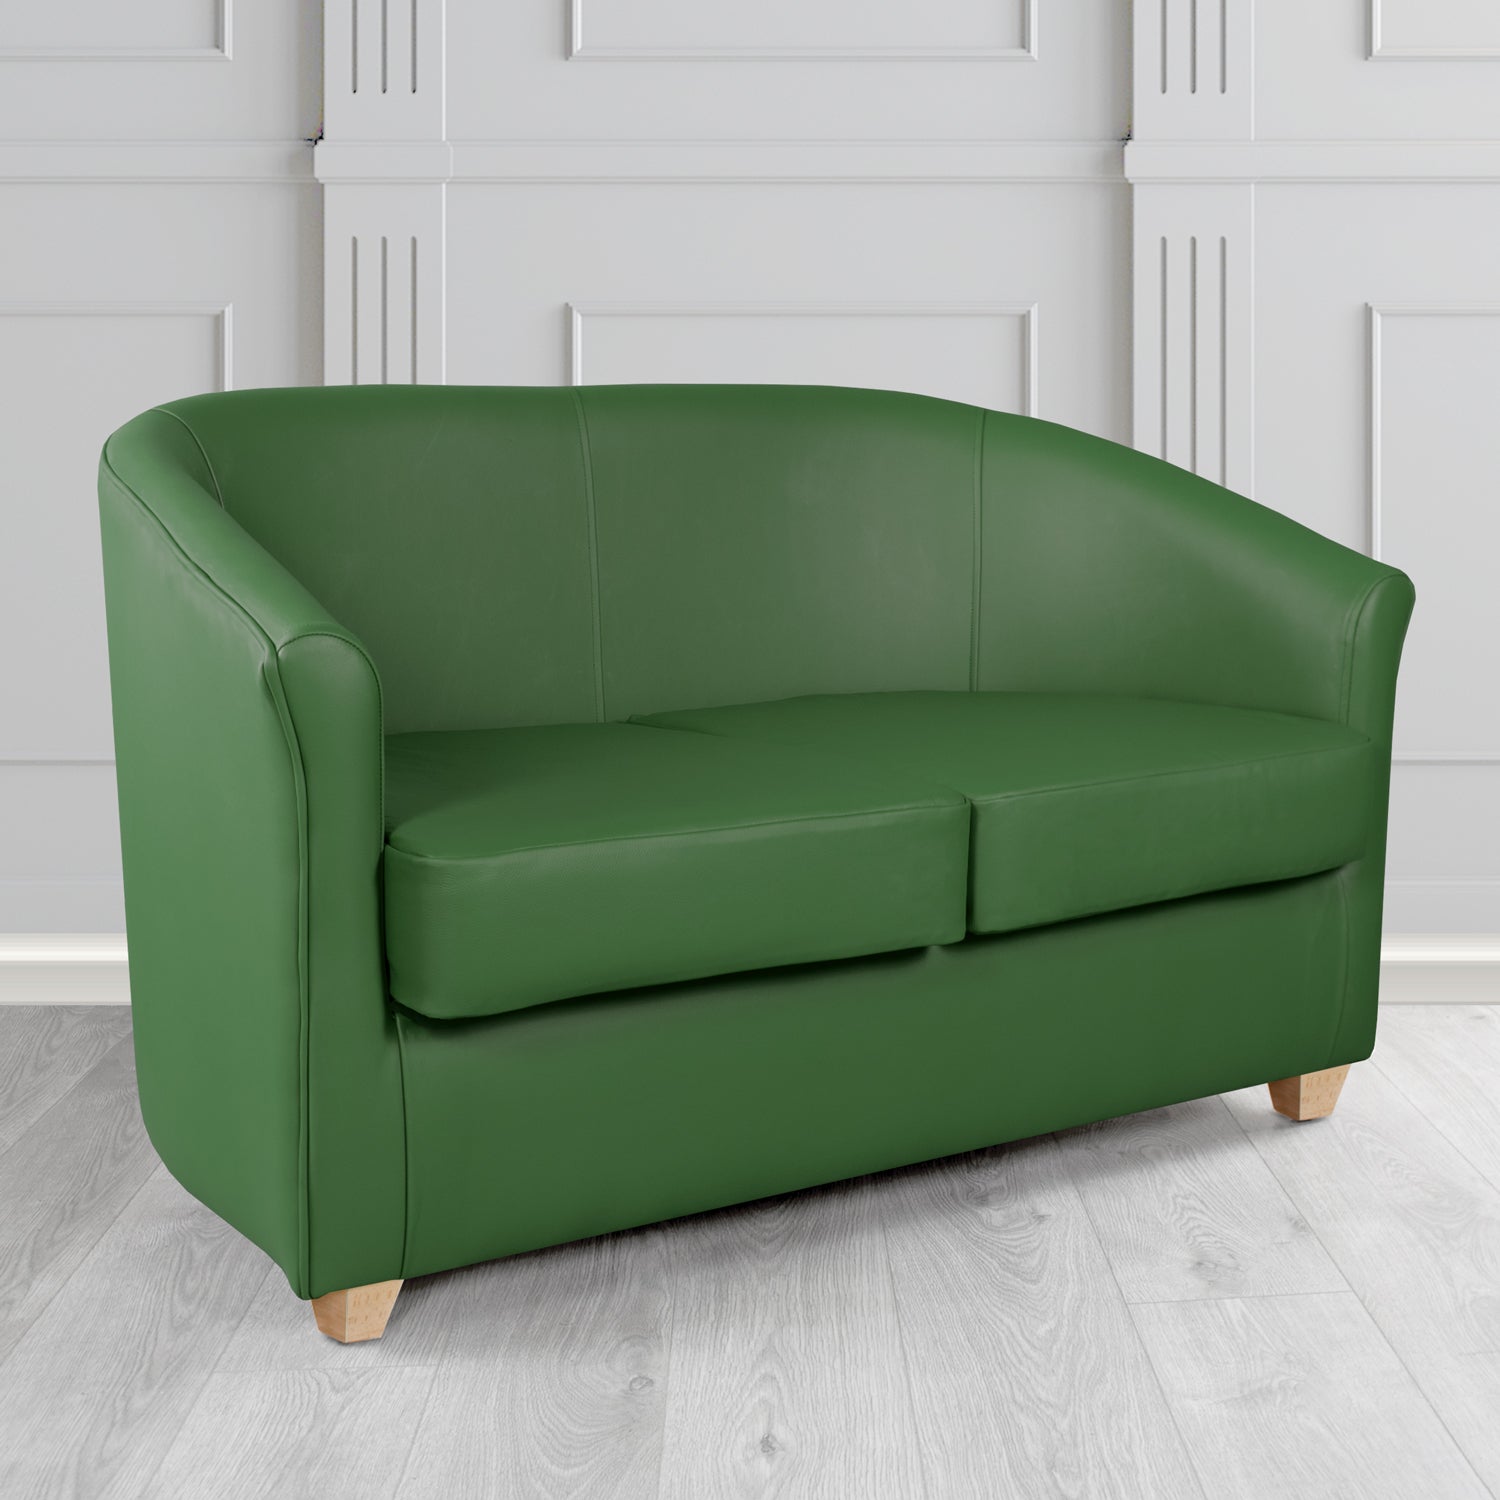 Cannes 2 Seater Tub Sofa in Just Colour Rainforest Crib 5 Faux Leather - The Tub Chair Shop